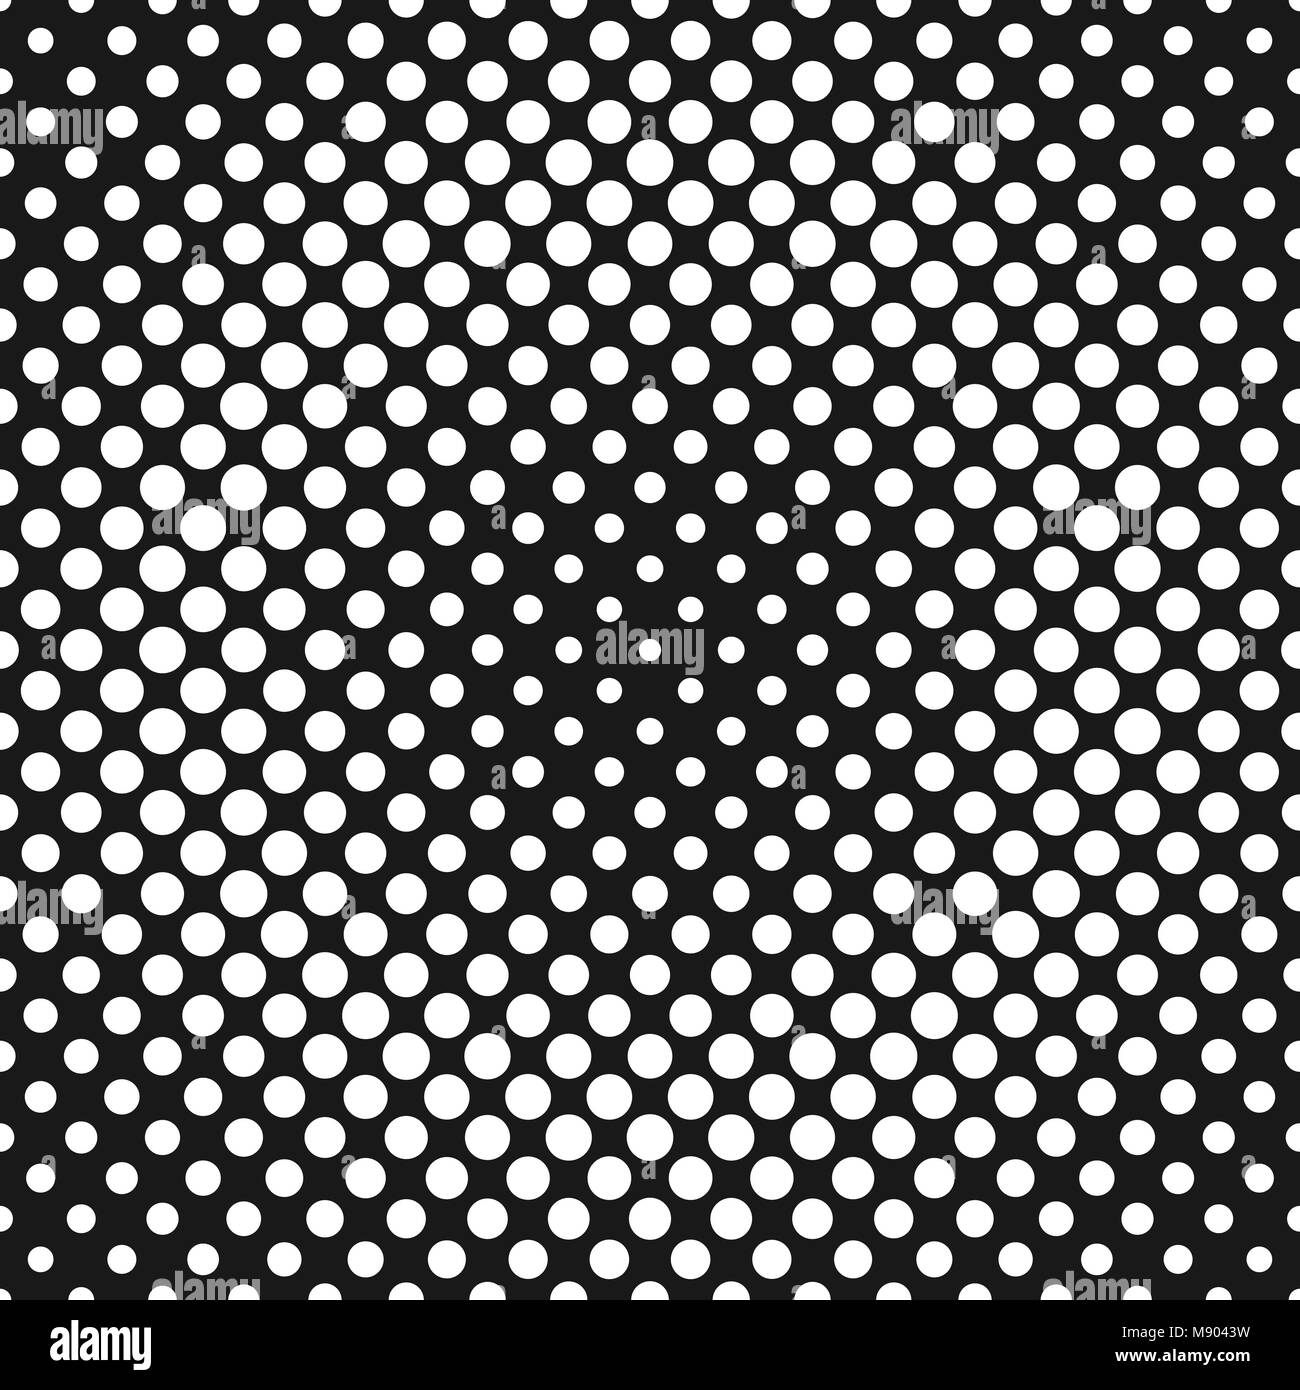 Halftone dotted background pattern template - vector graphic Stock Vector